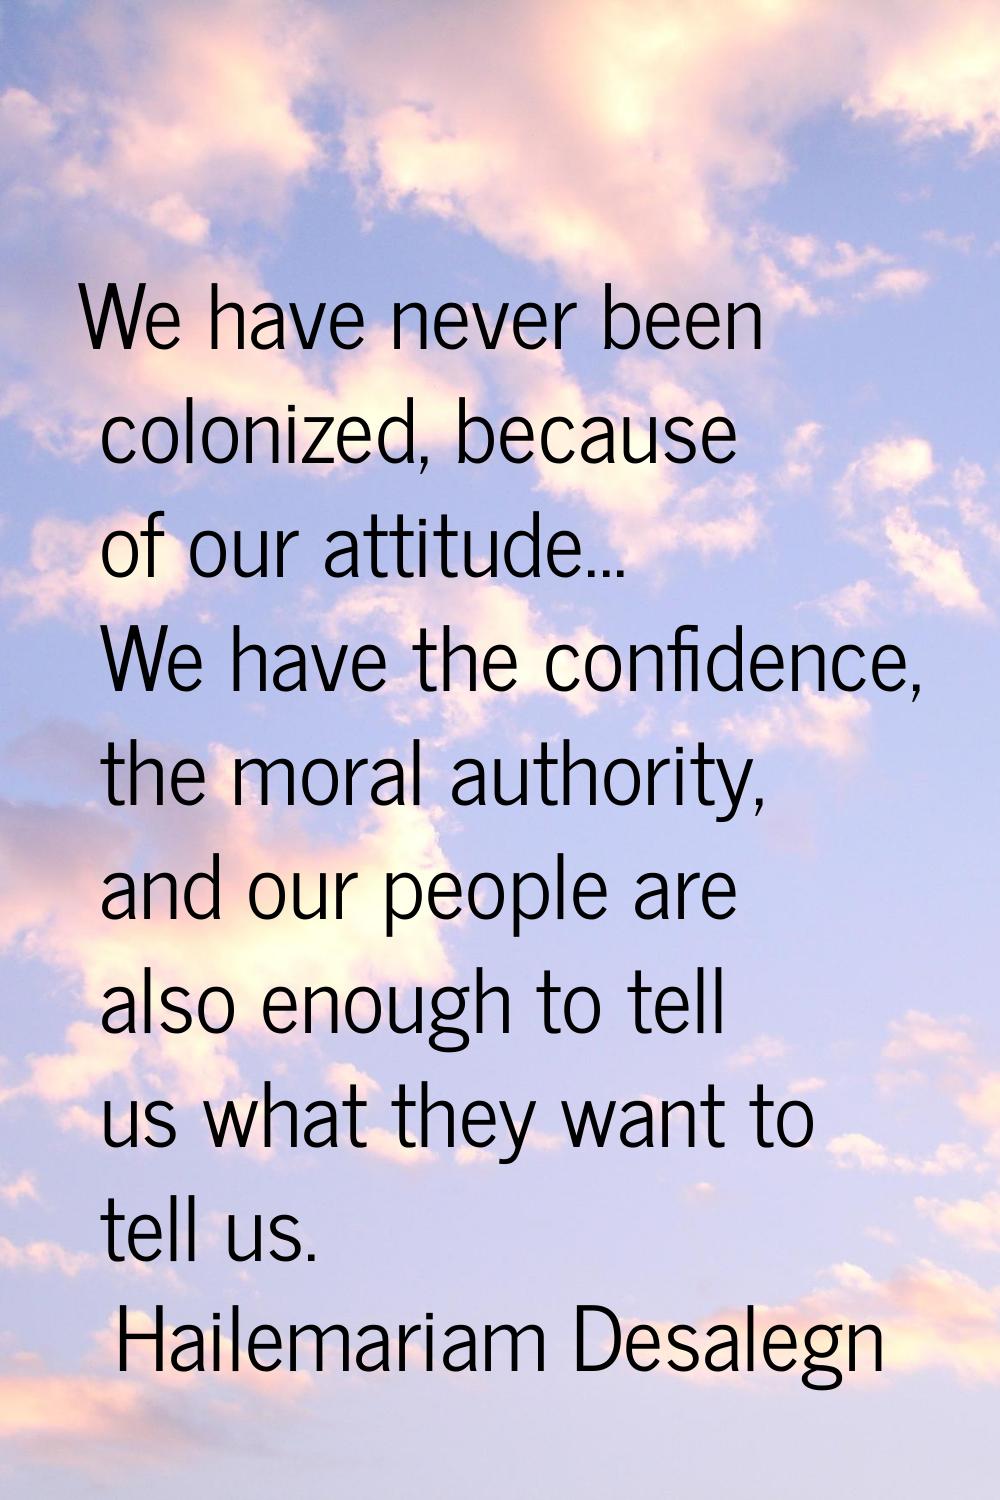 We have never been colonized, because of our attitude... We have the confidence, the moral authorit